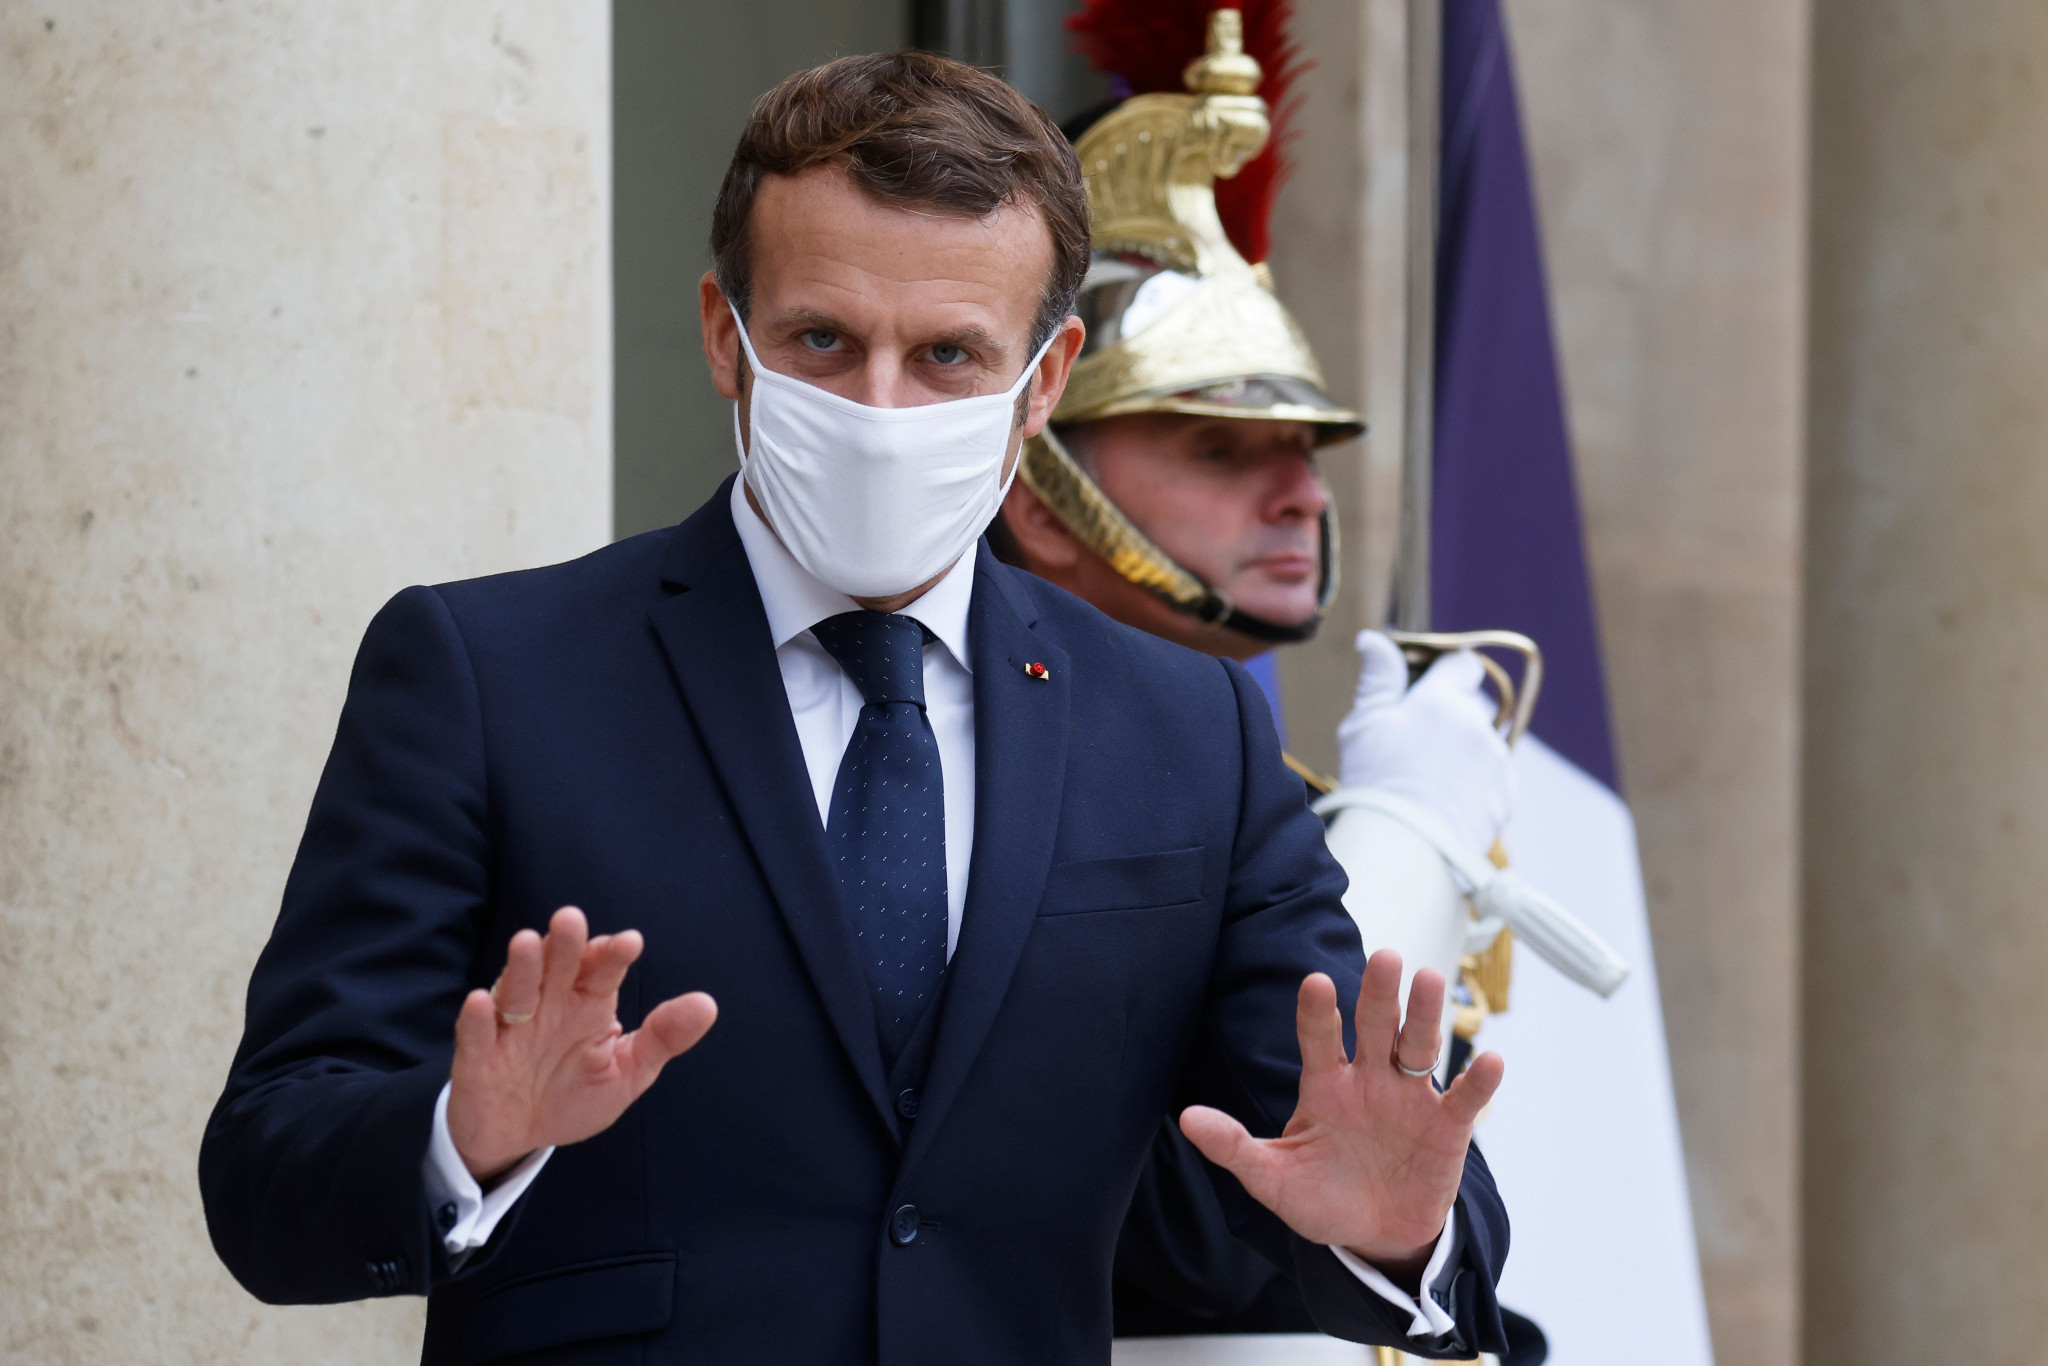 French President Emmanuel Macron has agreed to provide financial support for sports clubs struggling due to the coronavirus pandemic ©Getty Images